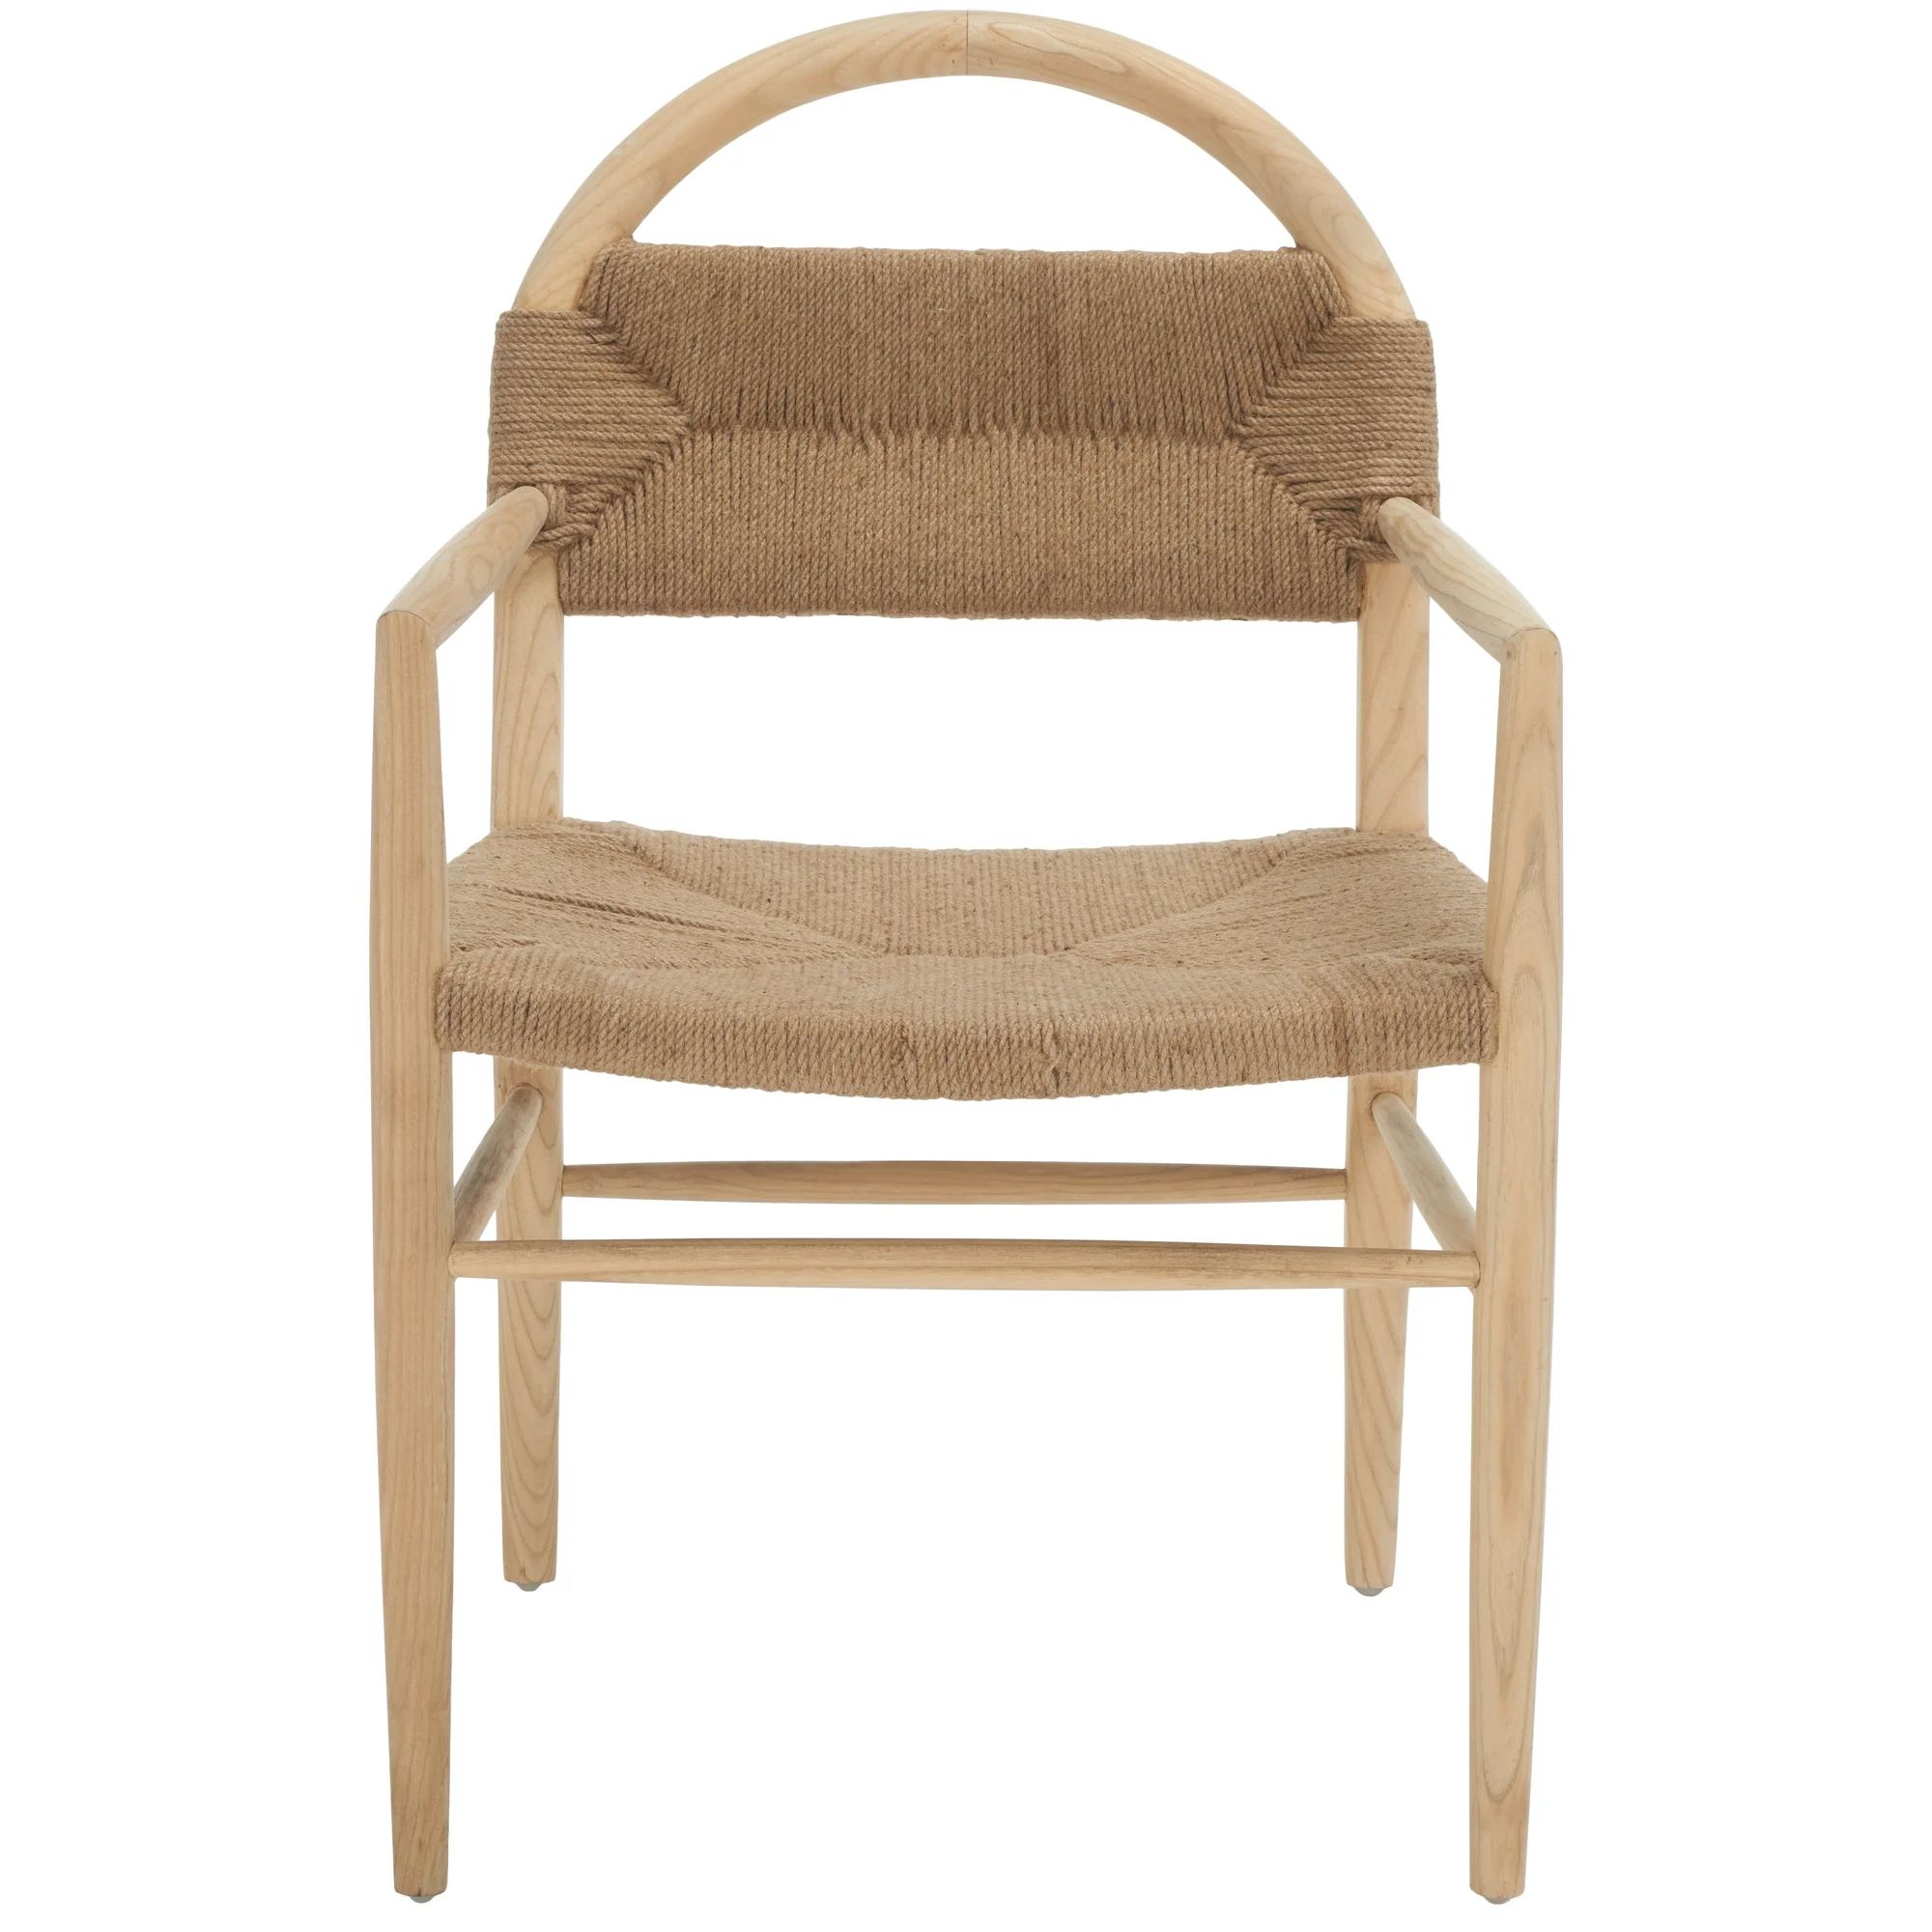 SAFAVIEH Farley Dining Chair, Natural Sungkai/Natural Jute Rope (22.8 in. W x 19.1 in. D x 36 in.... | Walmart (US)